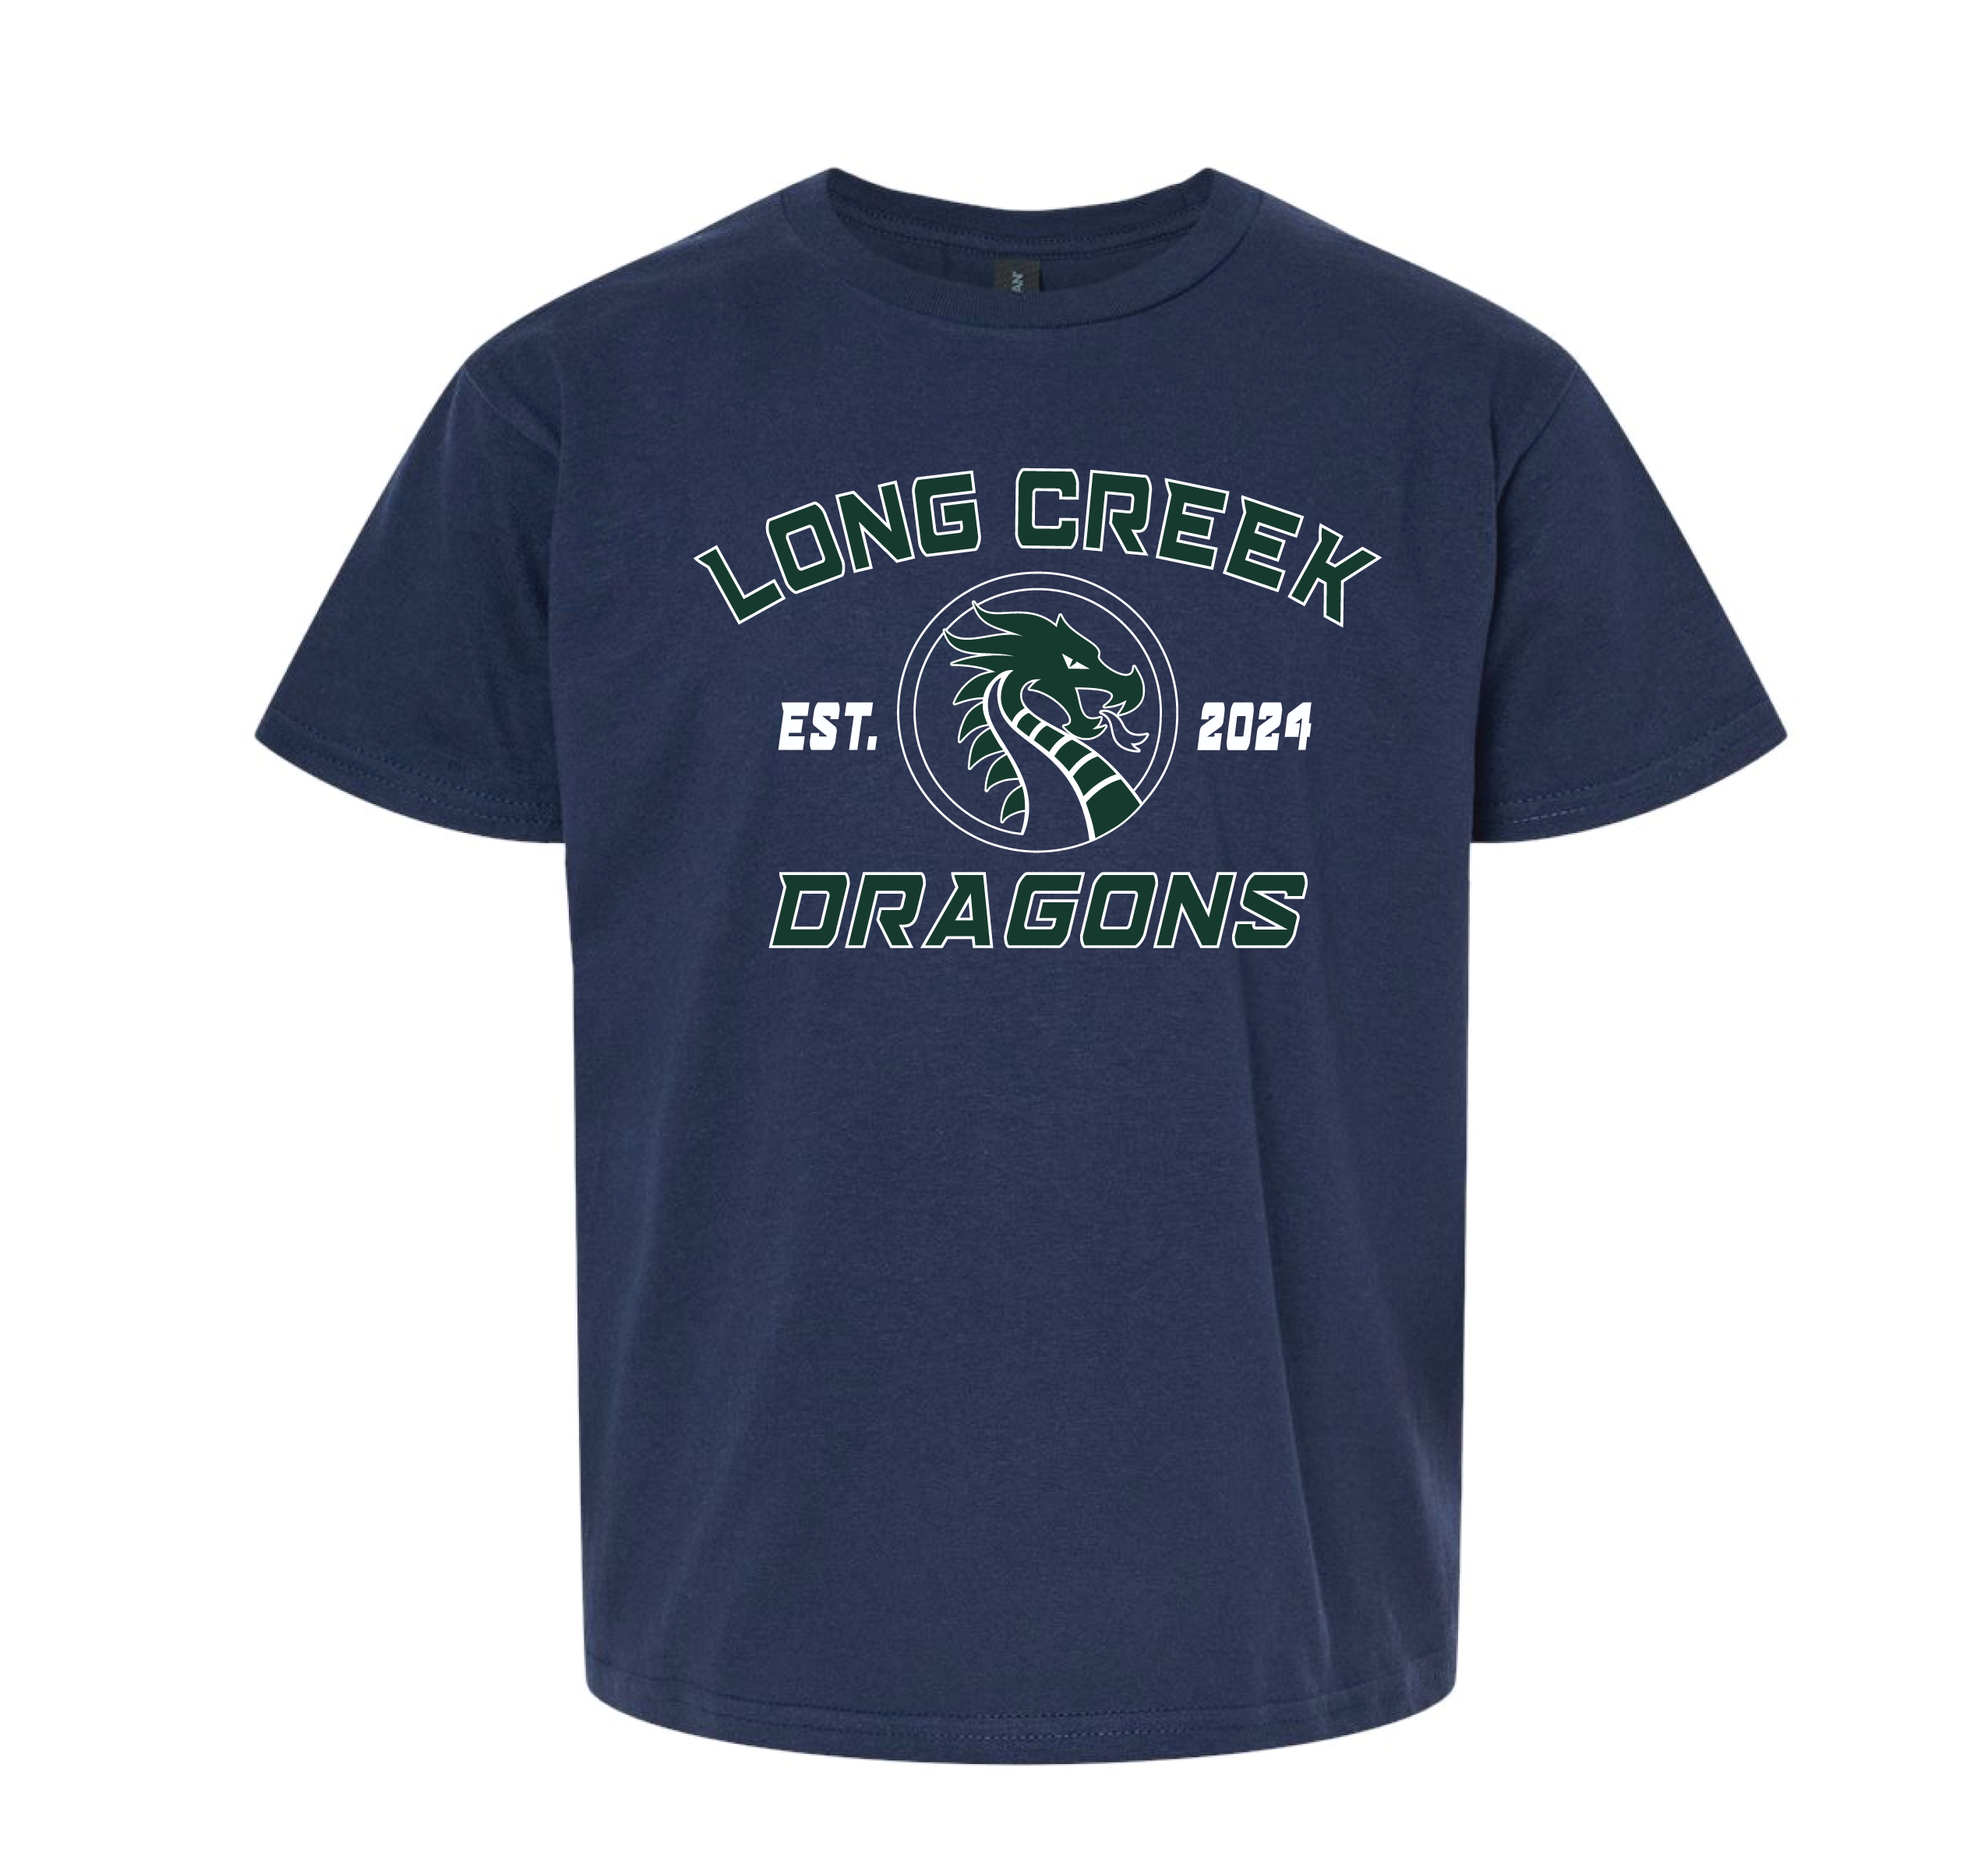 Official Youth Long Creek Dragons Tee